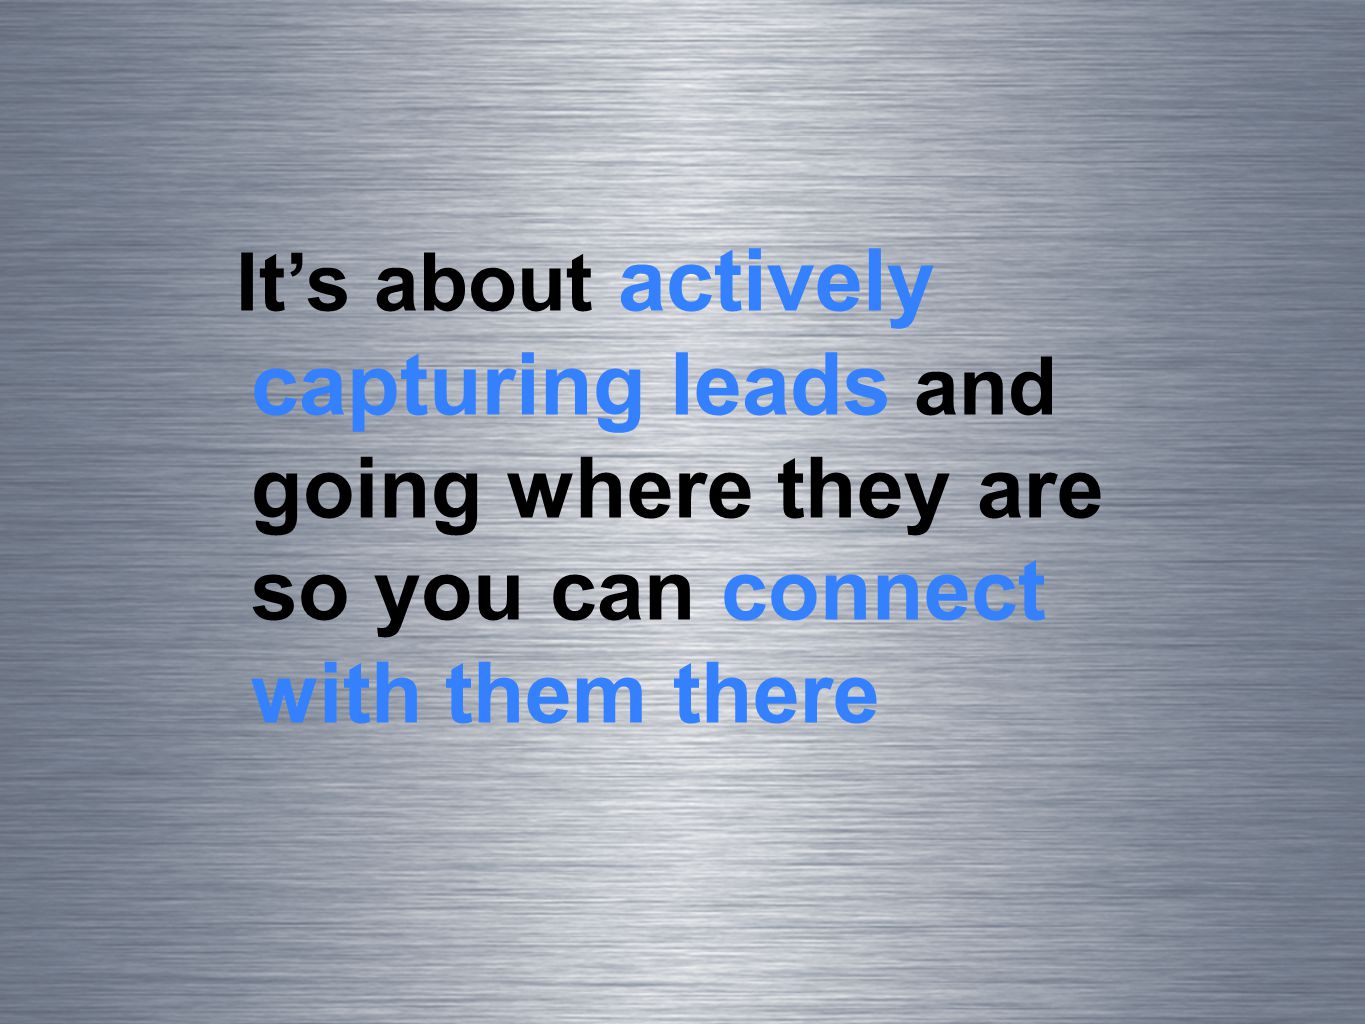 Its about actively capturing leads and going where they are so you can connect with them there